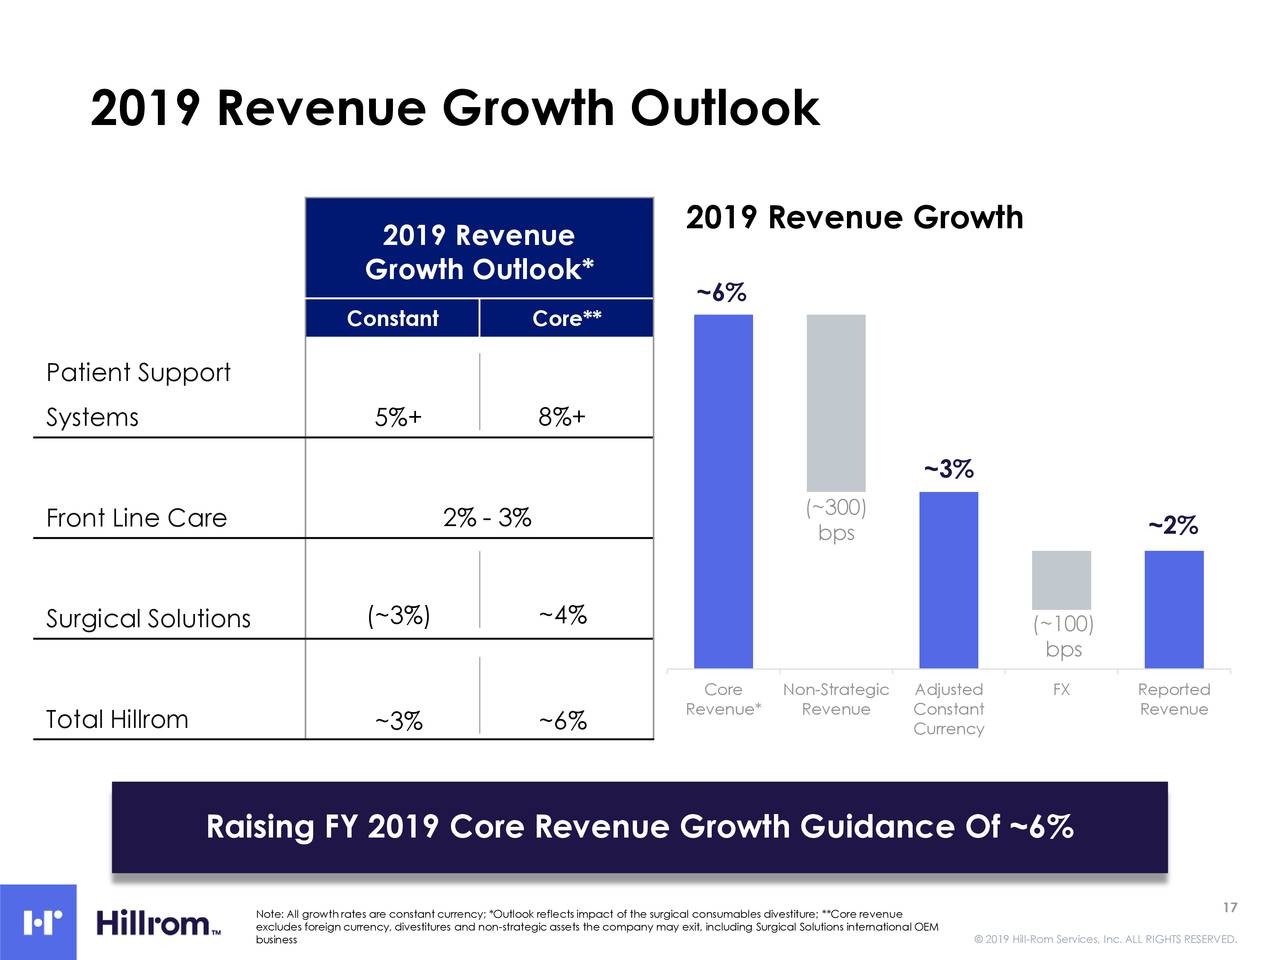 2019 Revenue Growth Outlook